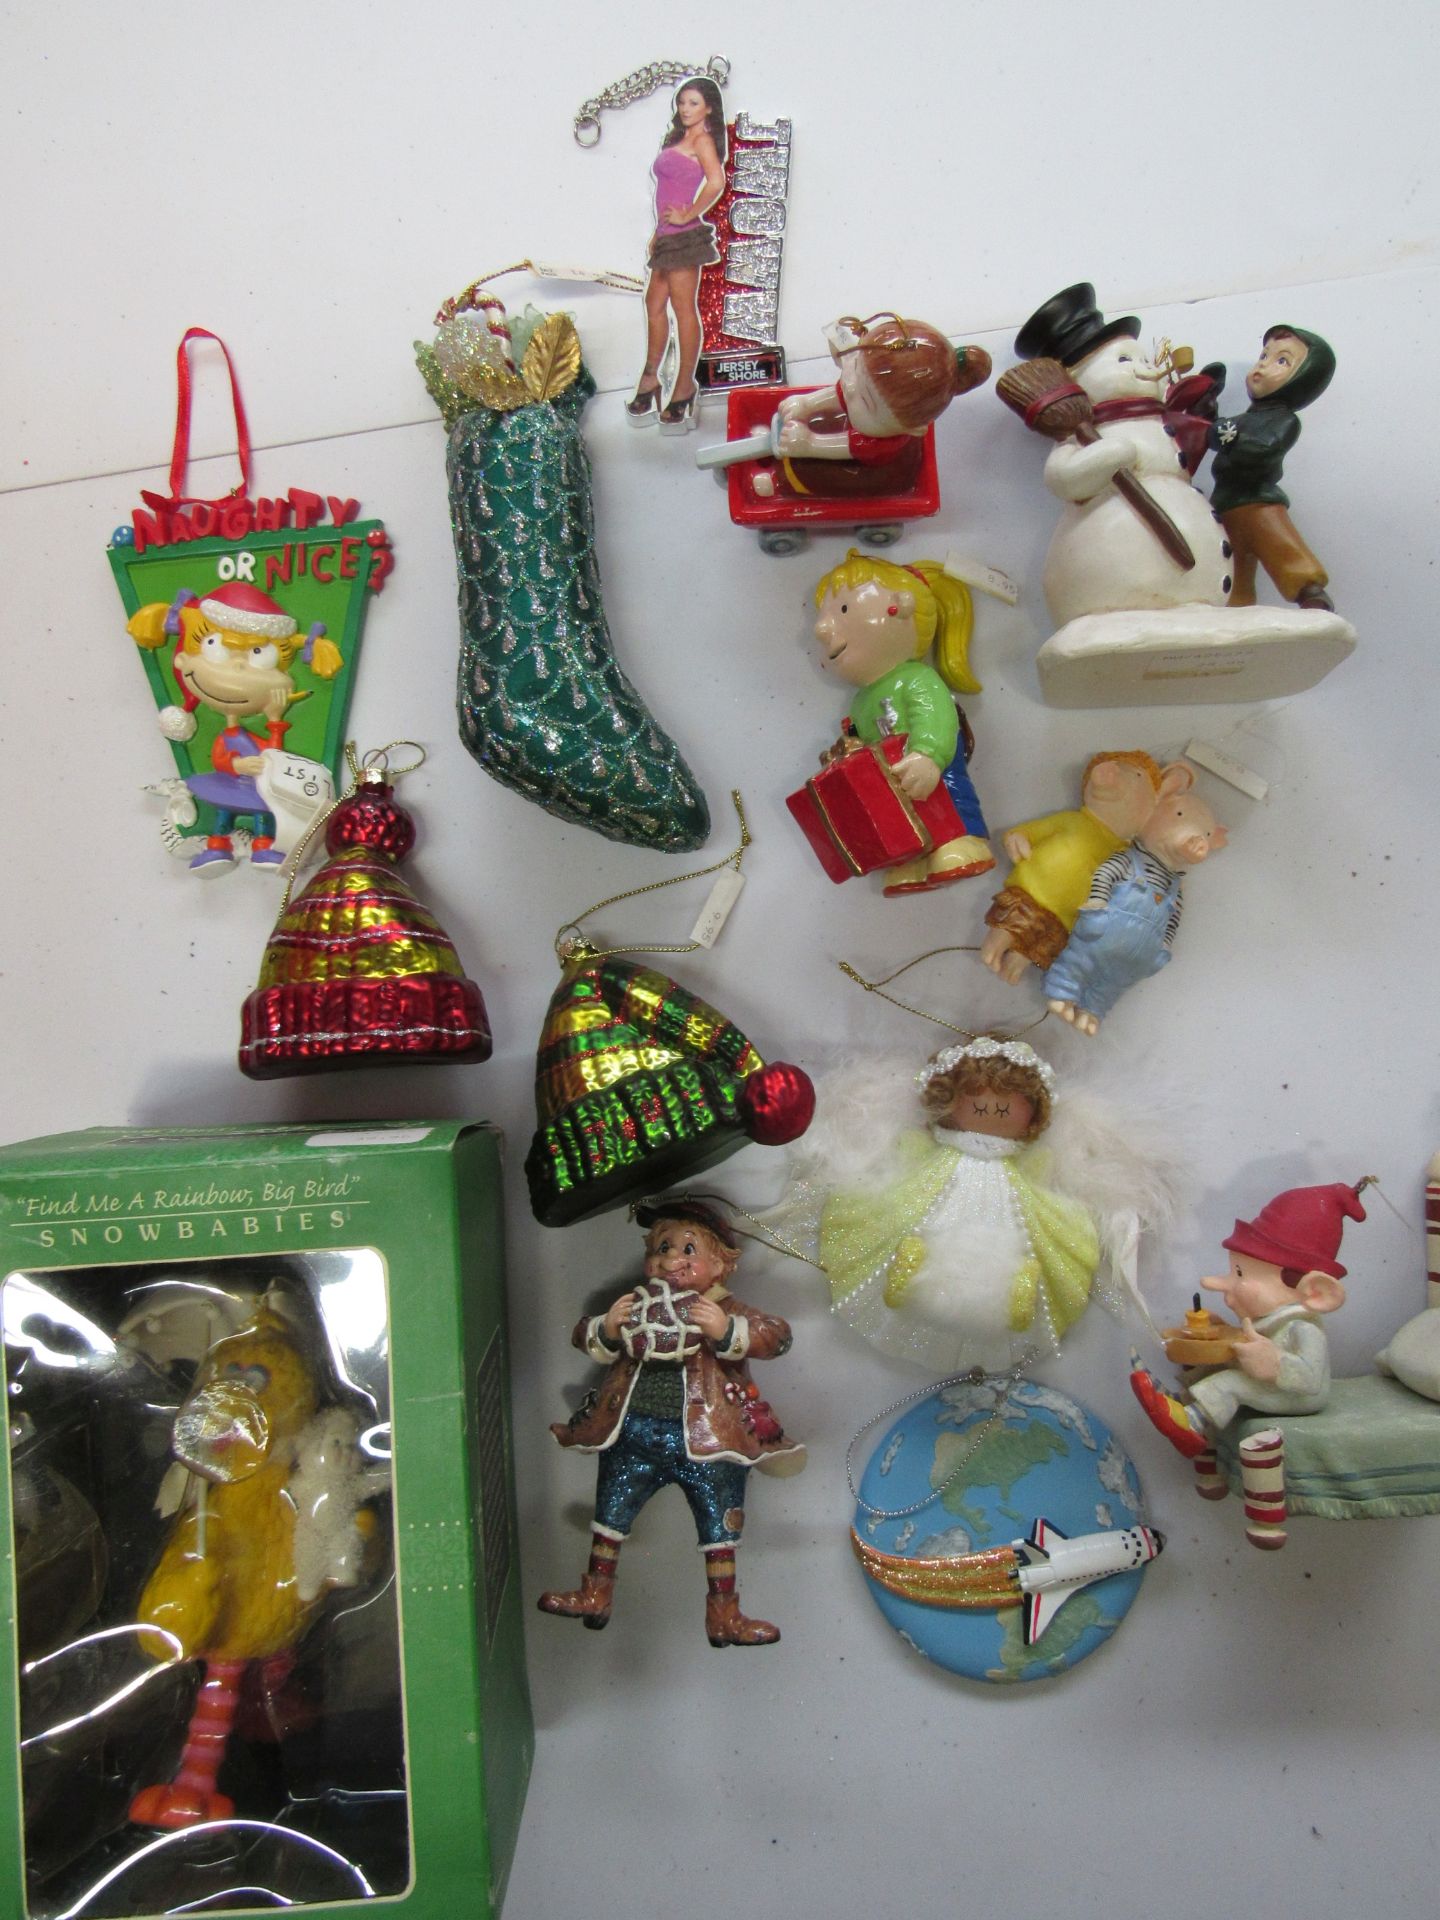 Group of Christmas ornaments: Big Bird, Rugrats, JWoww, space shuttle